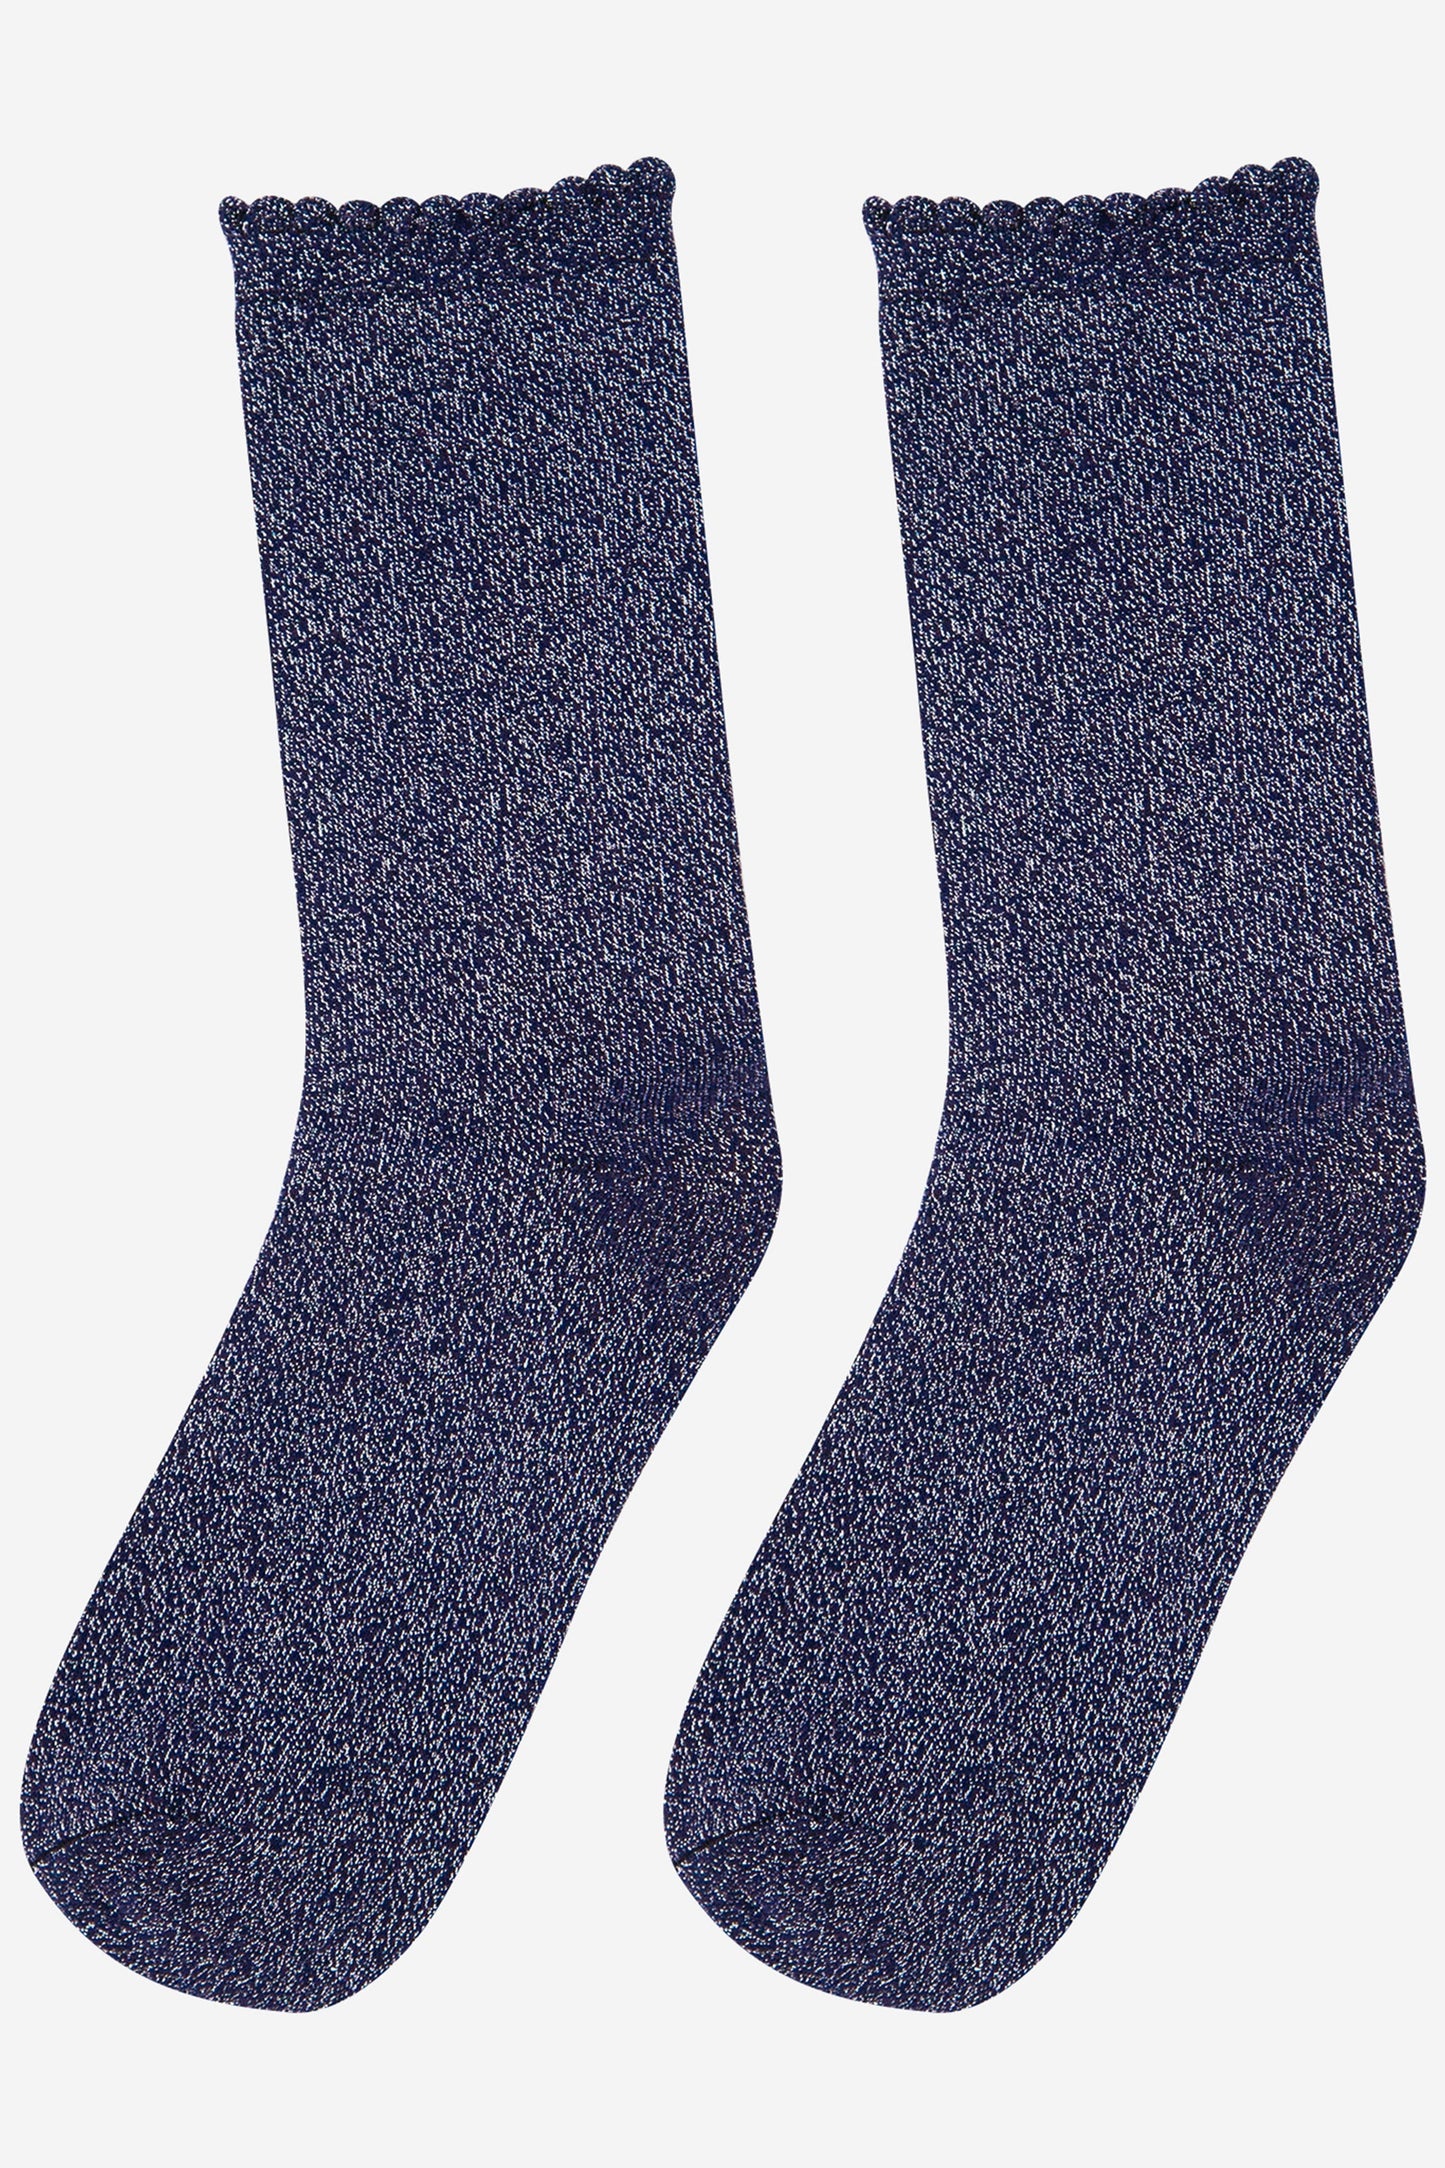 navy blue and silver all over glitter ankle socks with scalloped edge cuffs